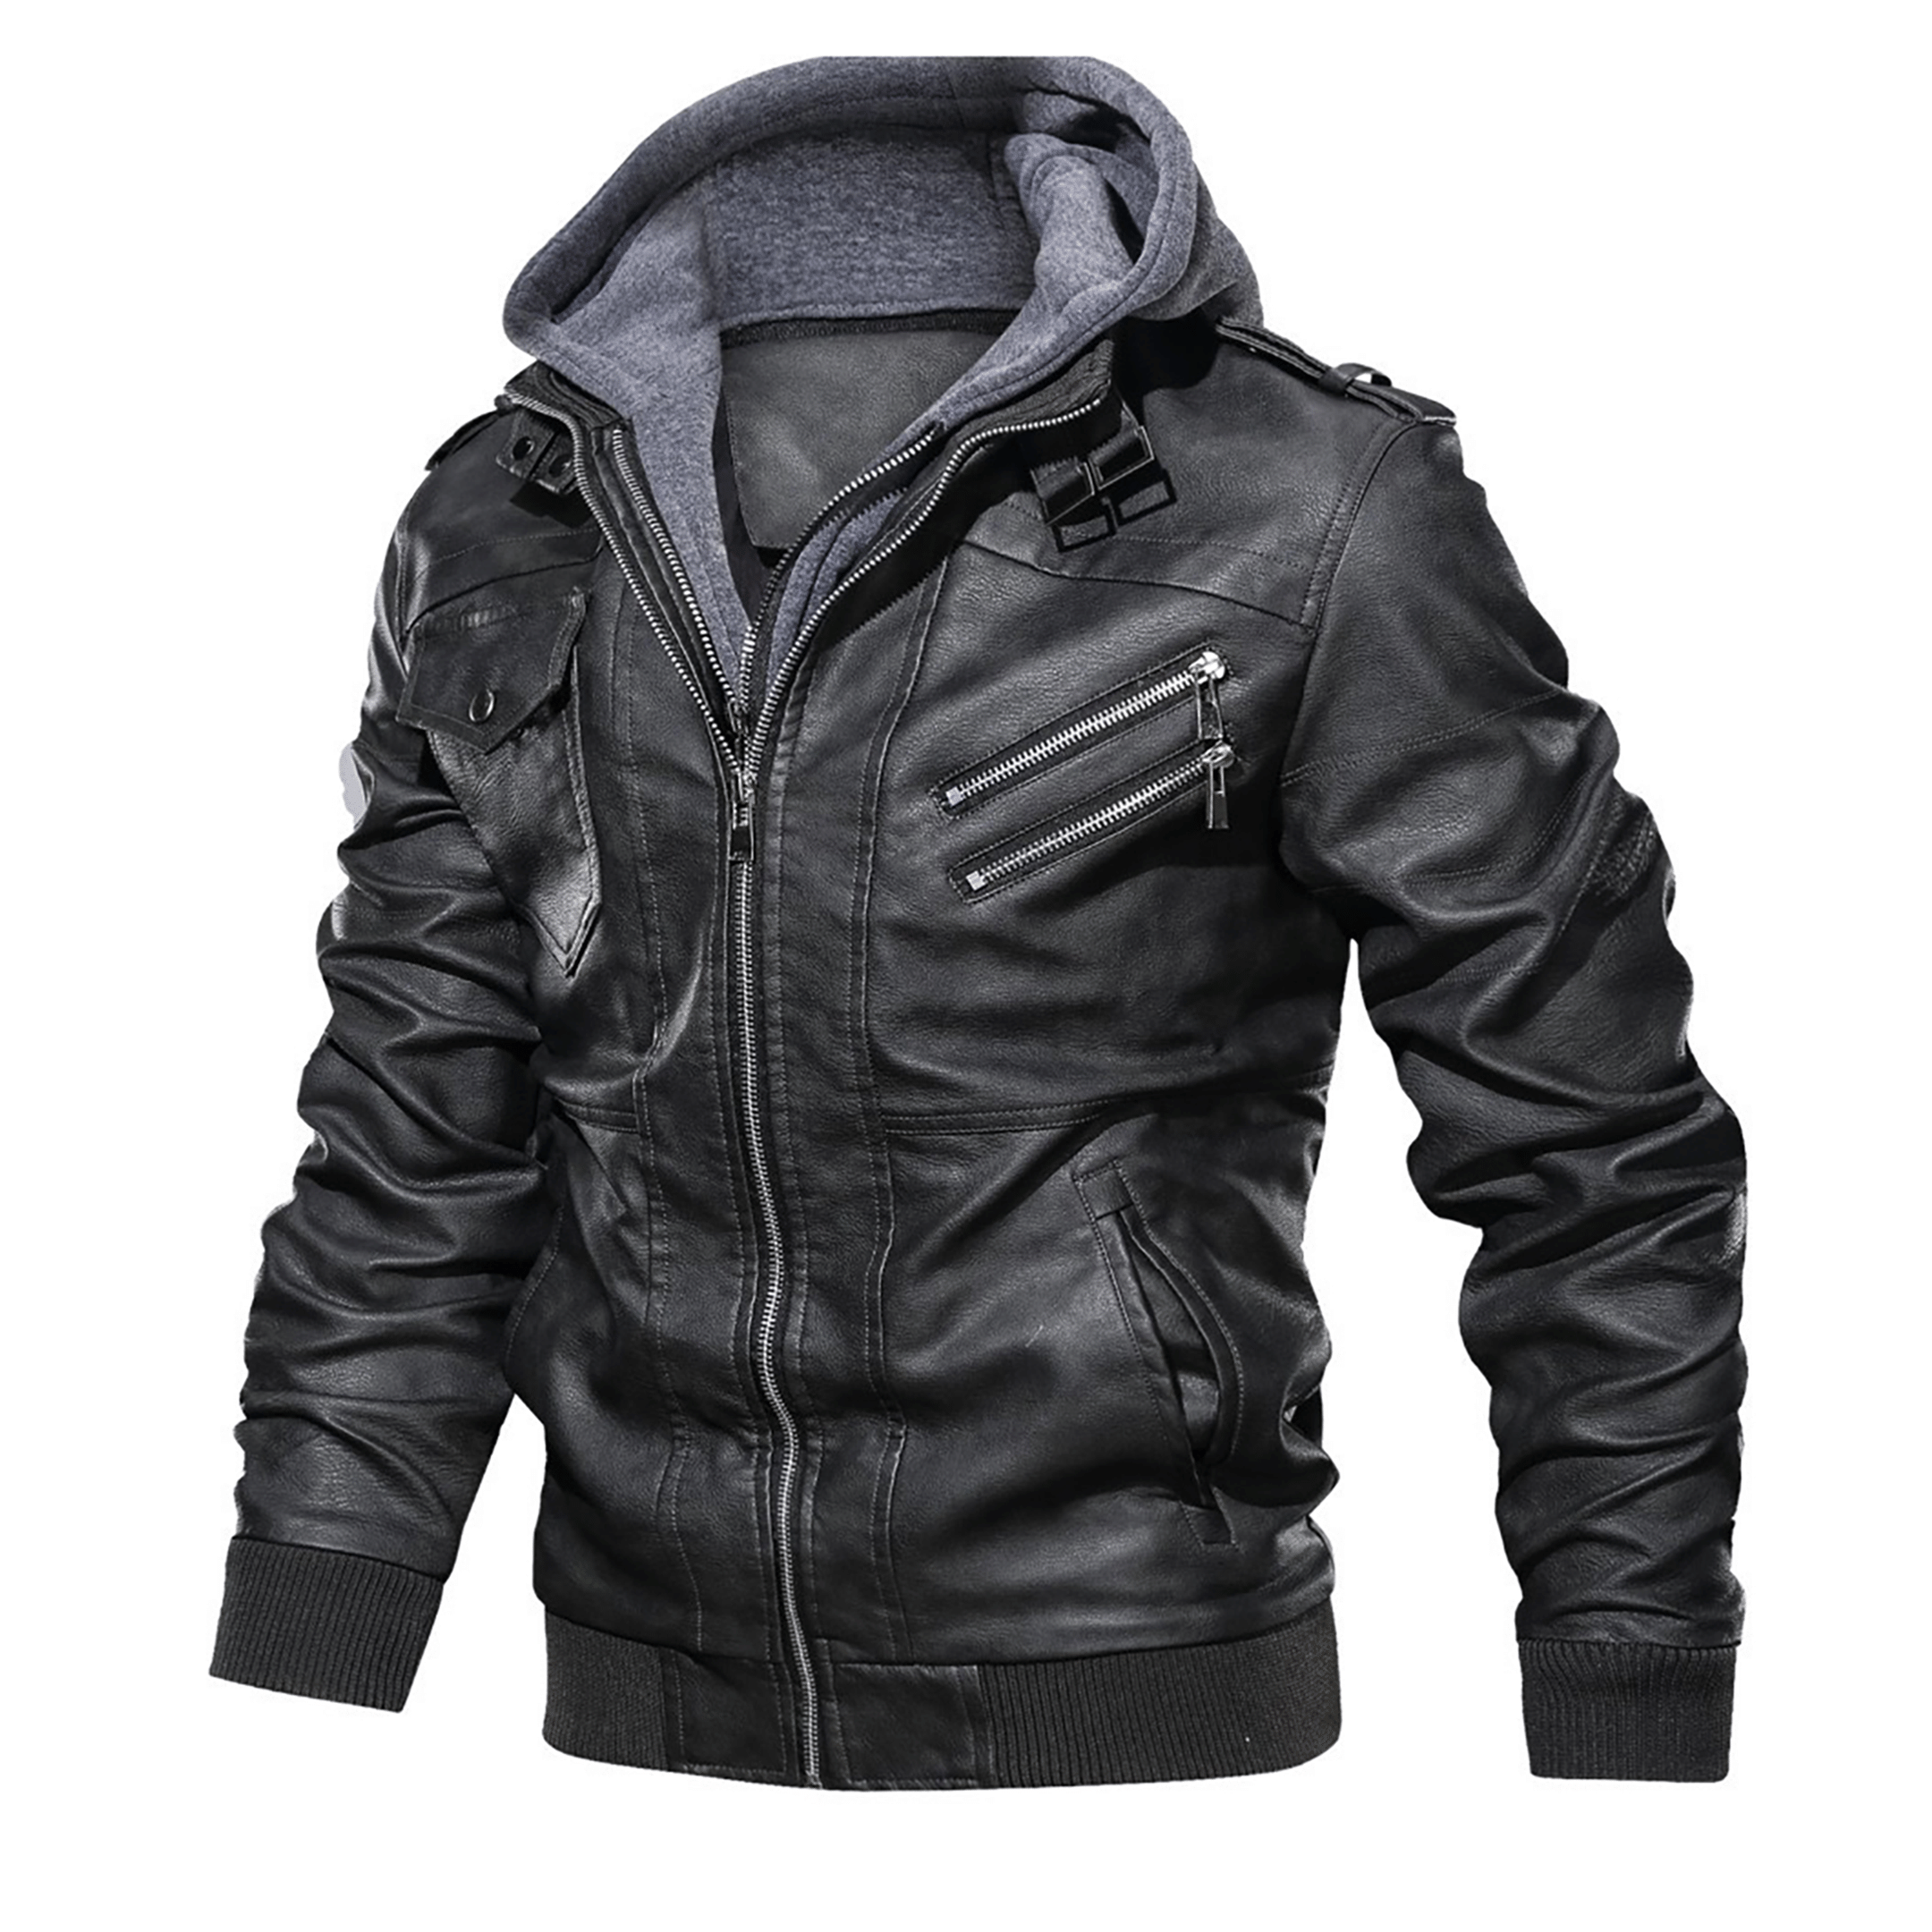 Top leather jackets and latest products 317